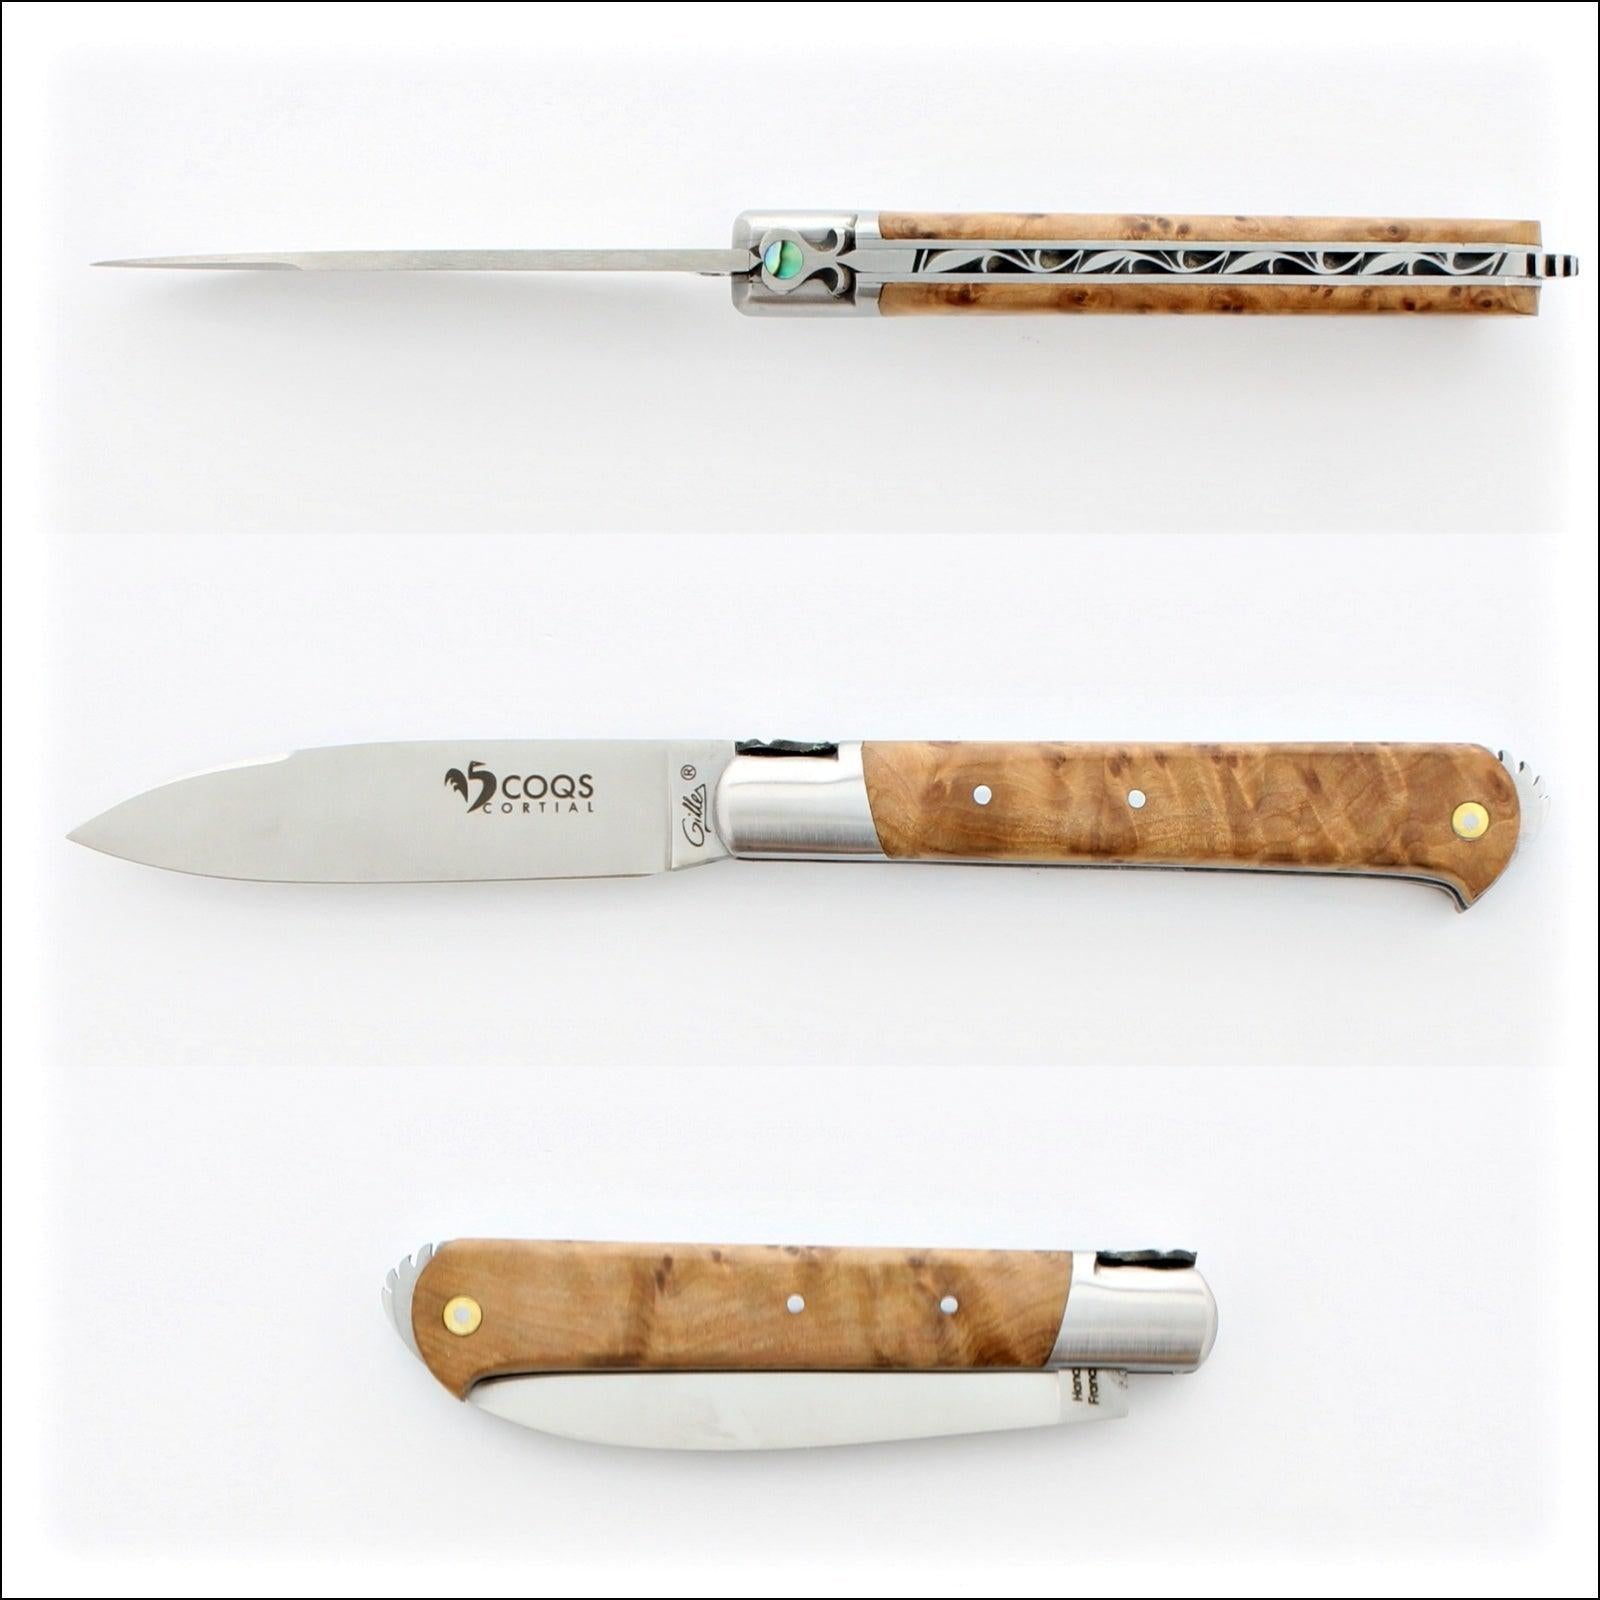 5 Coqs Pocket Knife - Thuya & Mother of Pearl Inlay